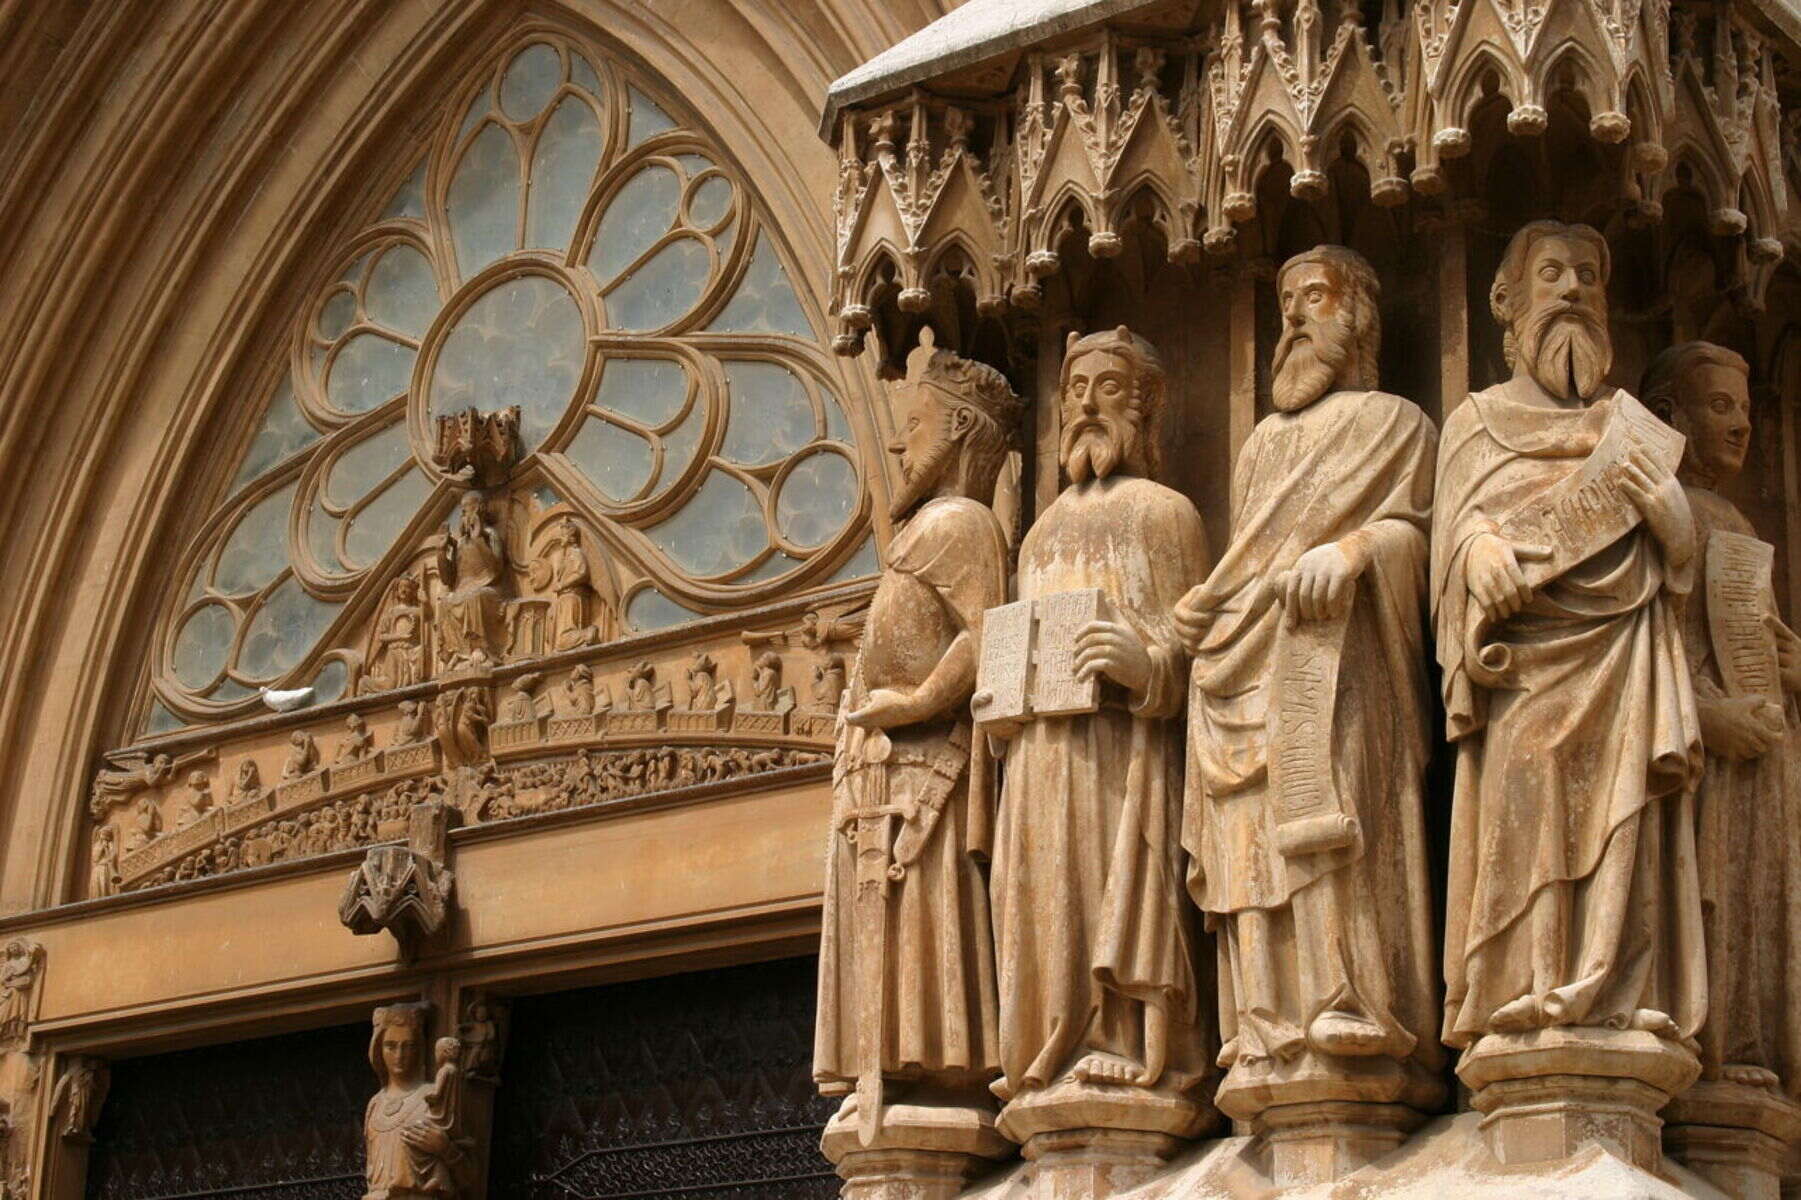 Why Was So Much Sculpture Included In A Gothic Church?